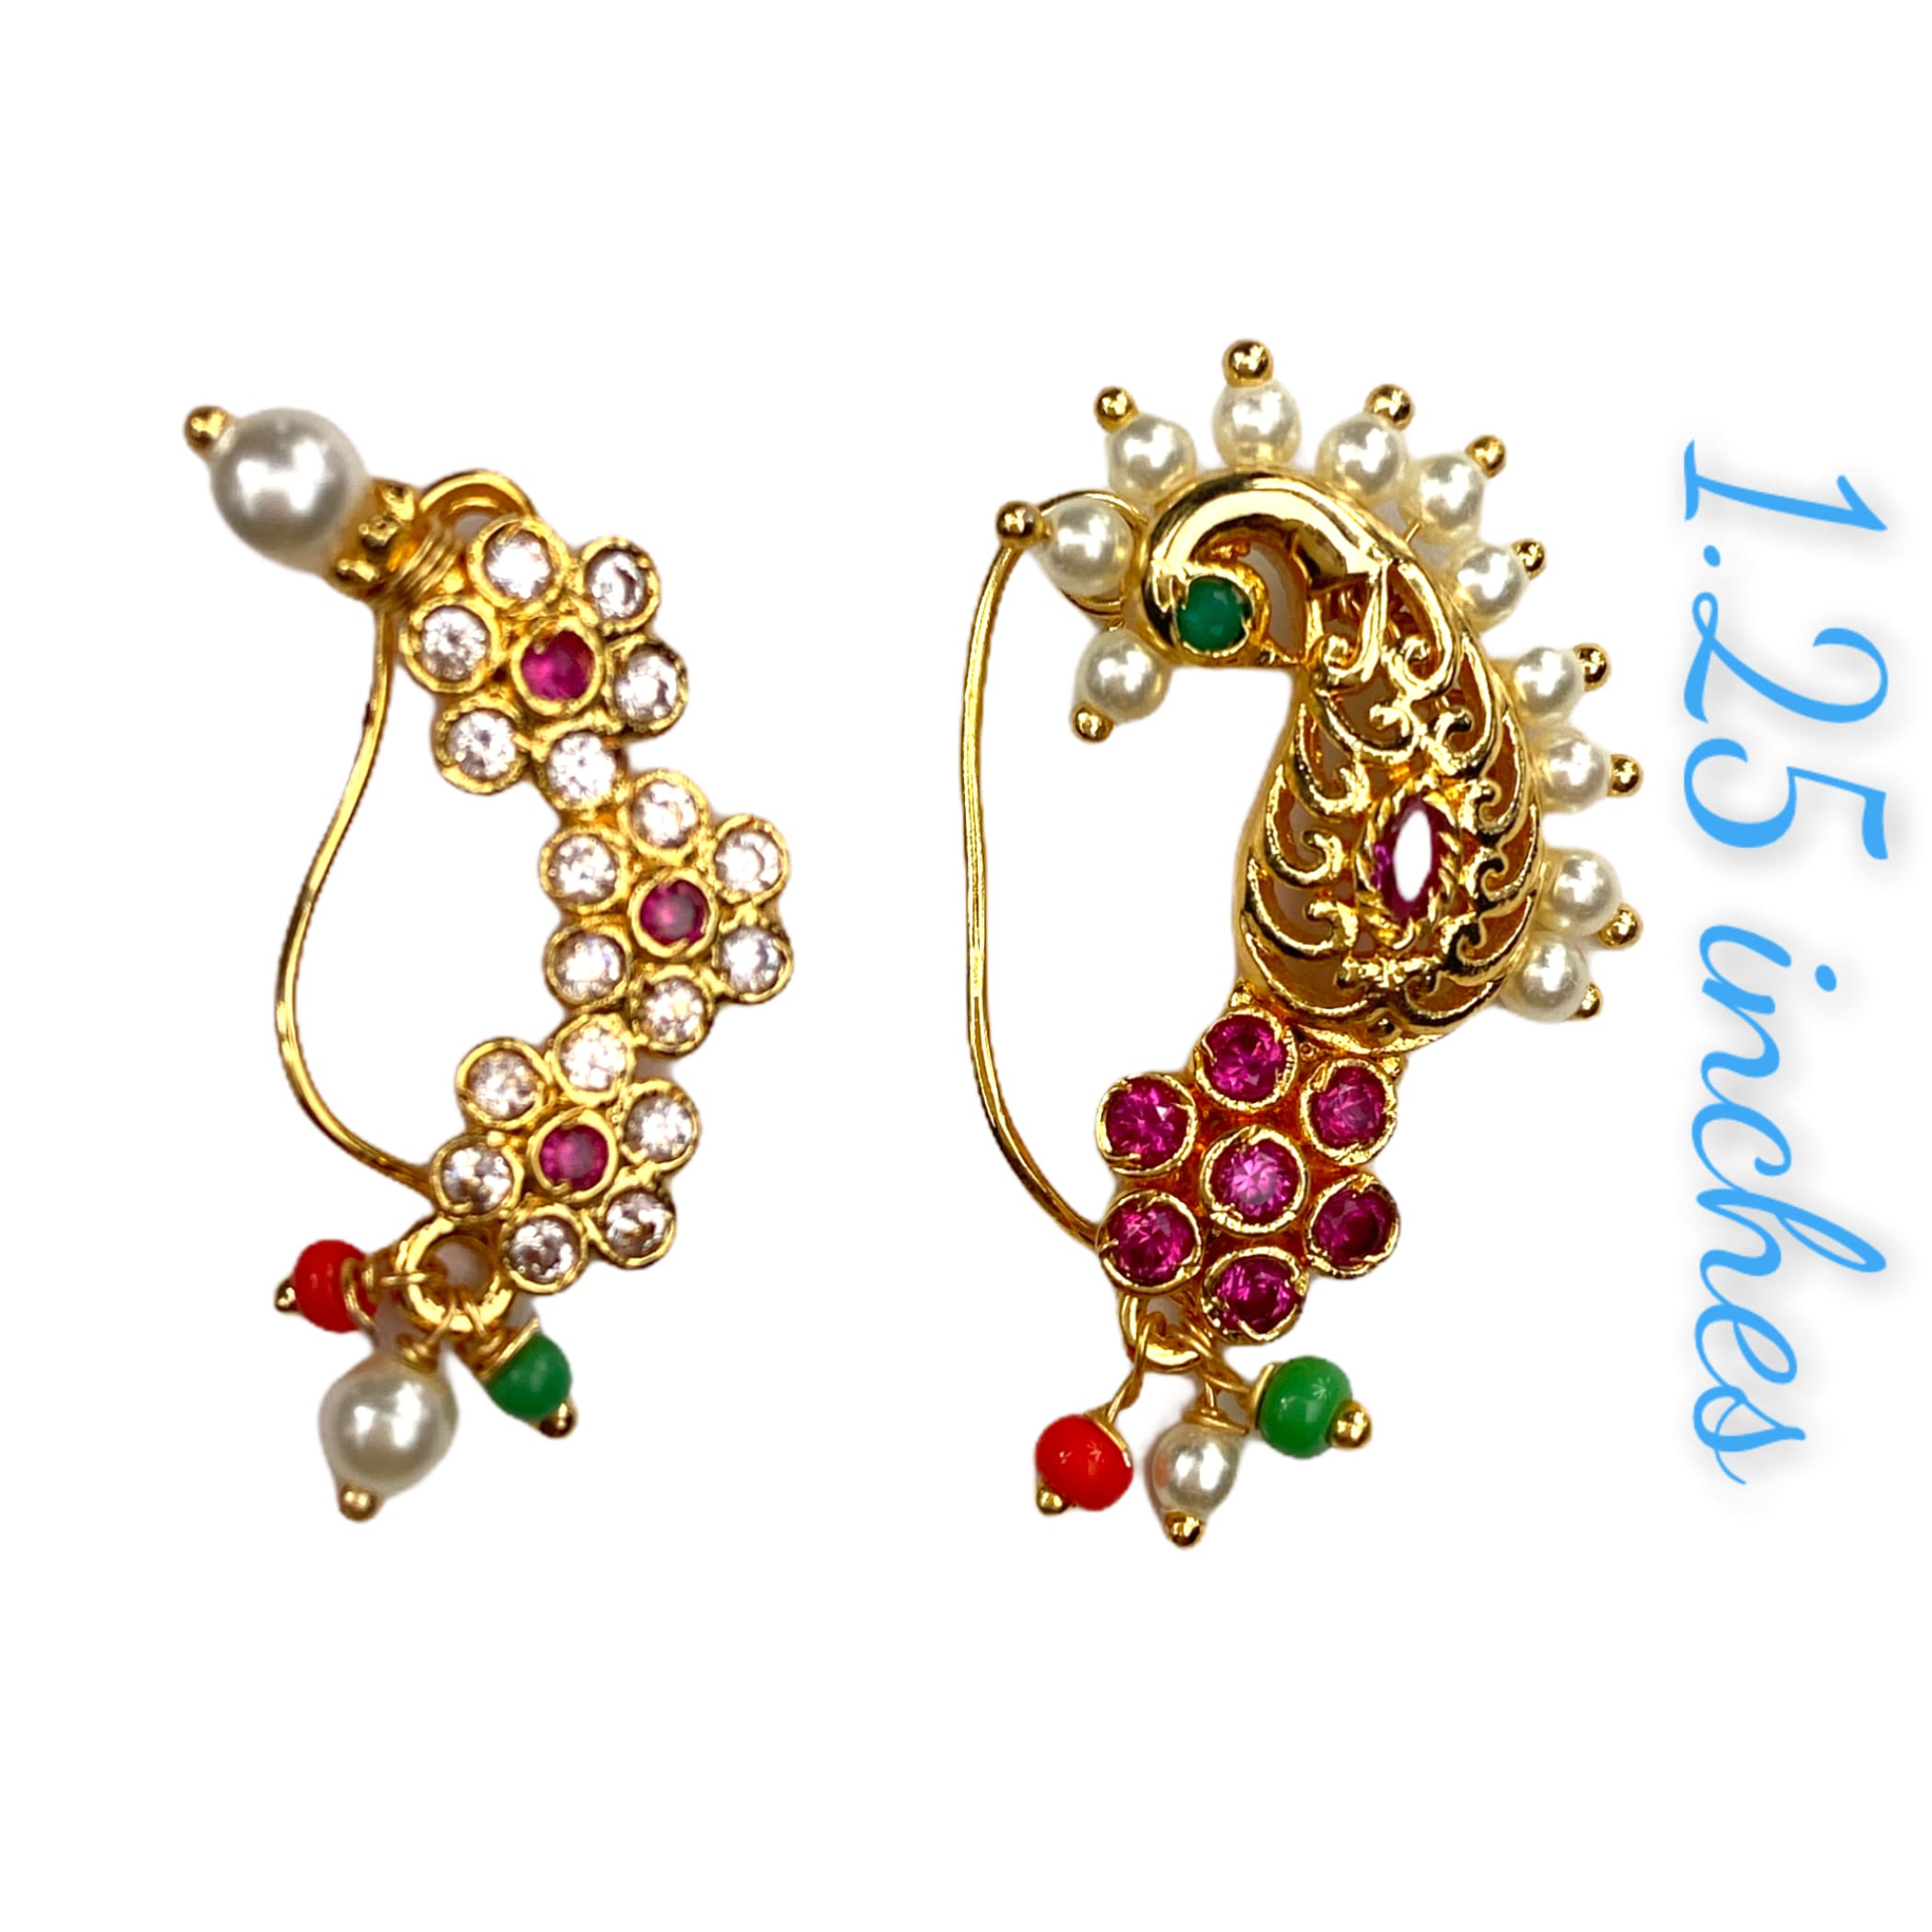 Buy Nath,meenakari Peacock Gold Plated Big Red Nath,rajputi Jewellery,  Nathani,piercing Bridal Wedding Nathani,nose Ring,indian Jewelry,nose Pin  Online in India - Etsy